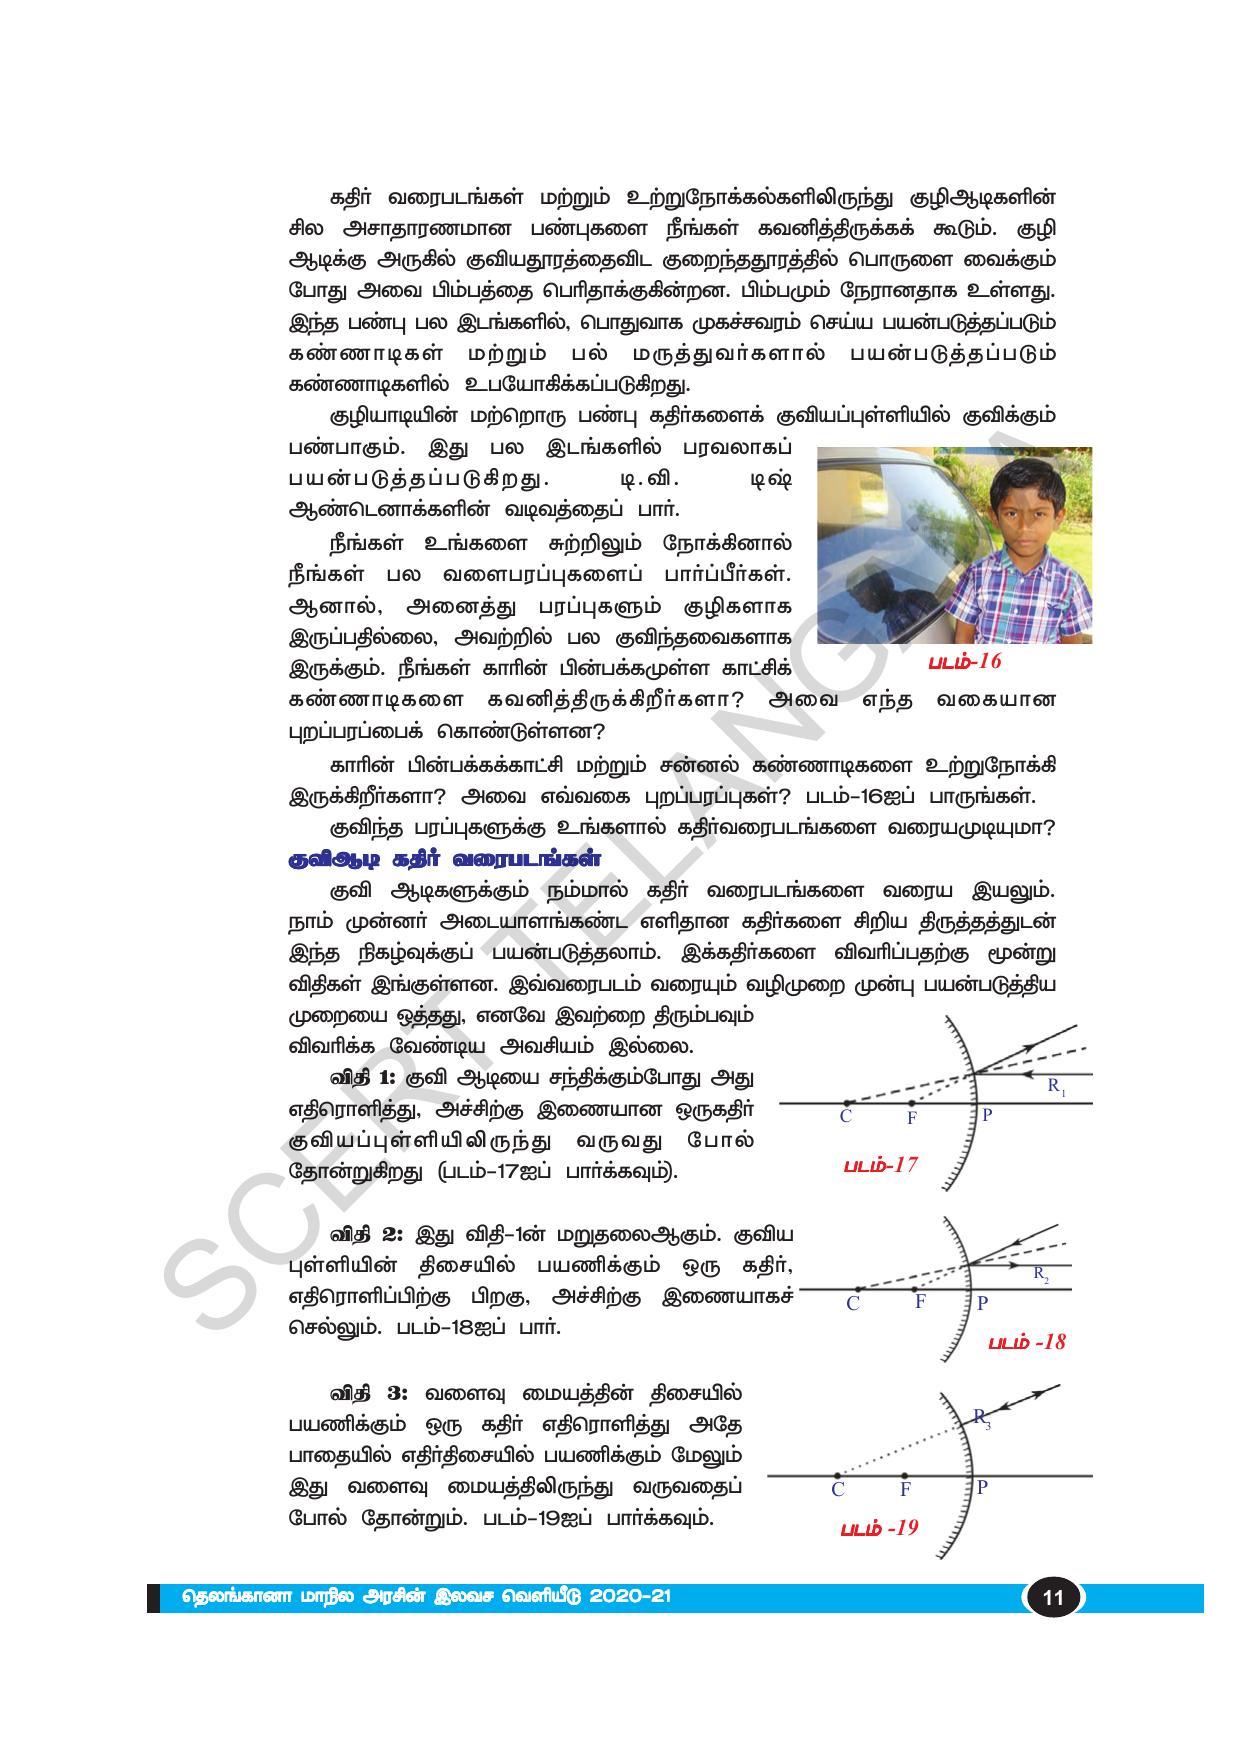 TS SCERT Class 10 Physical Science(Tamil Medium) Text Book - Page 23